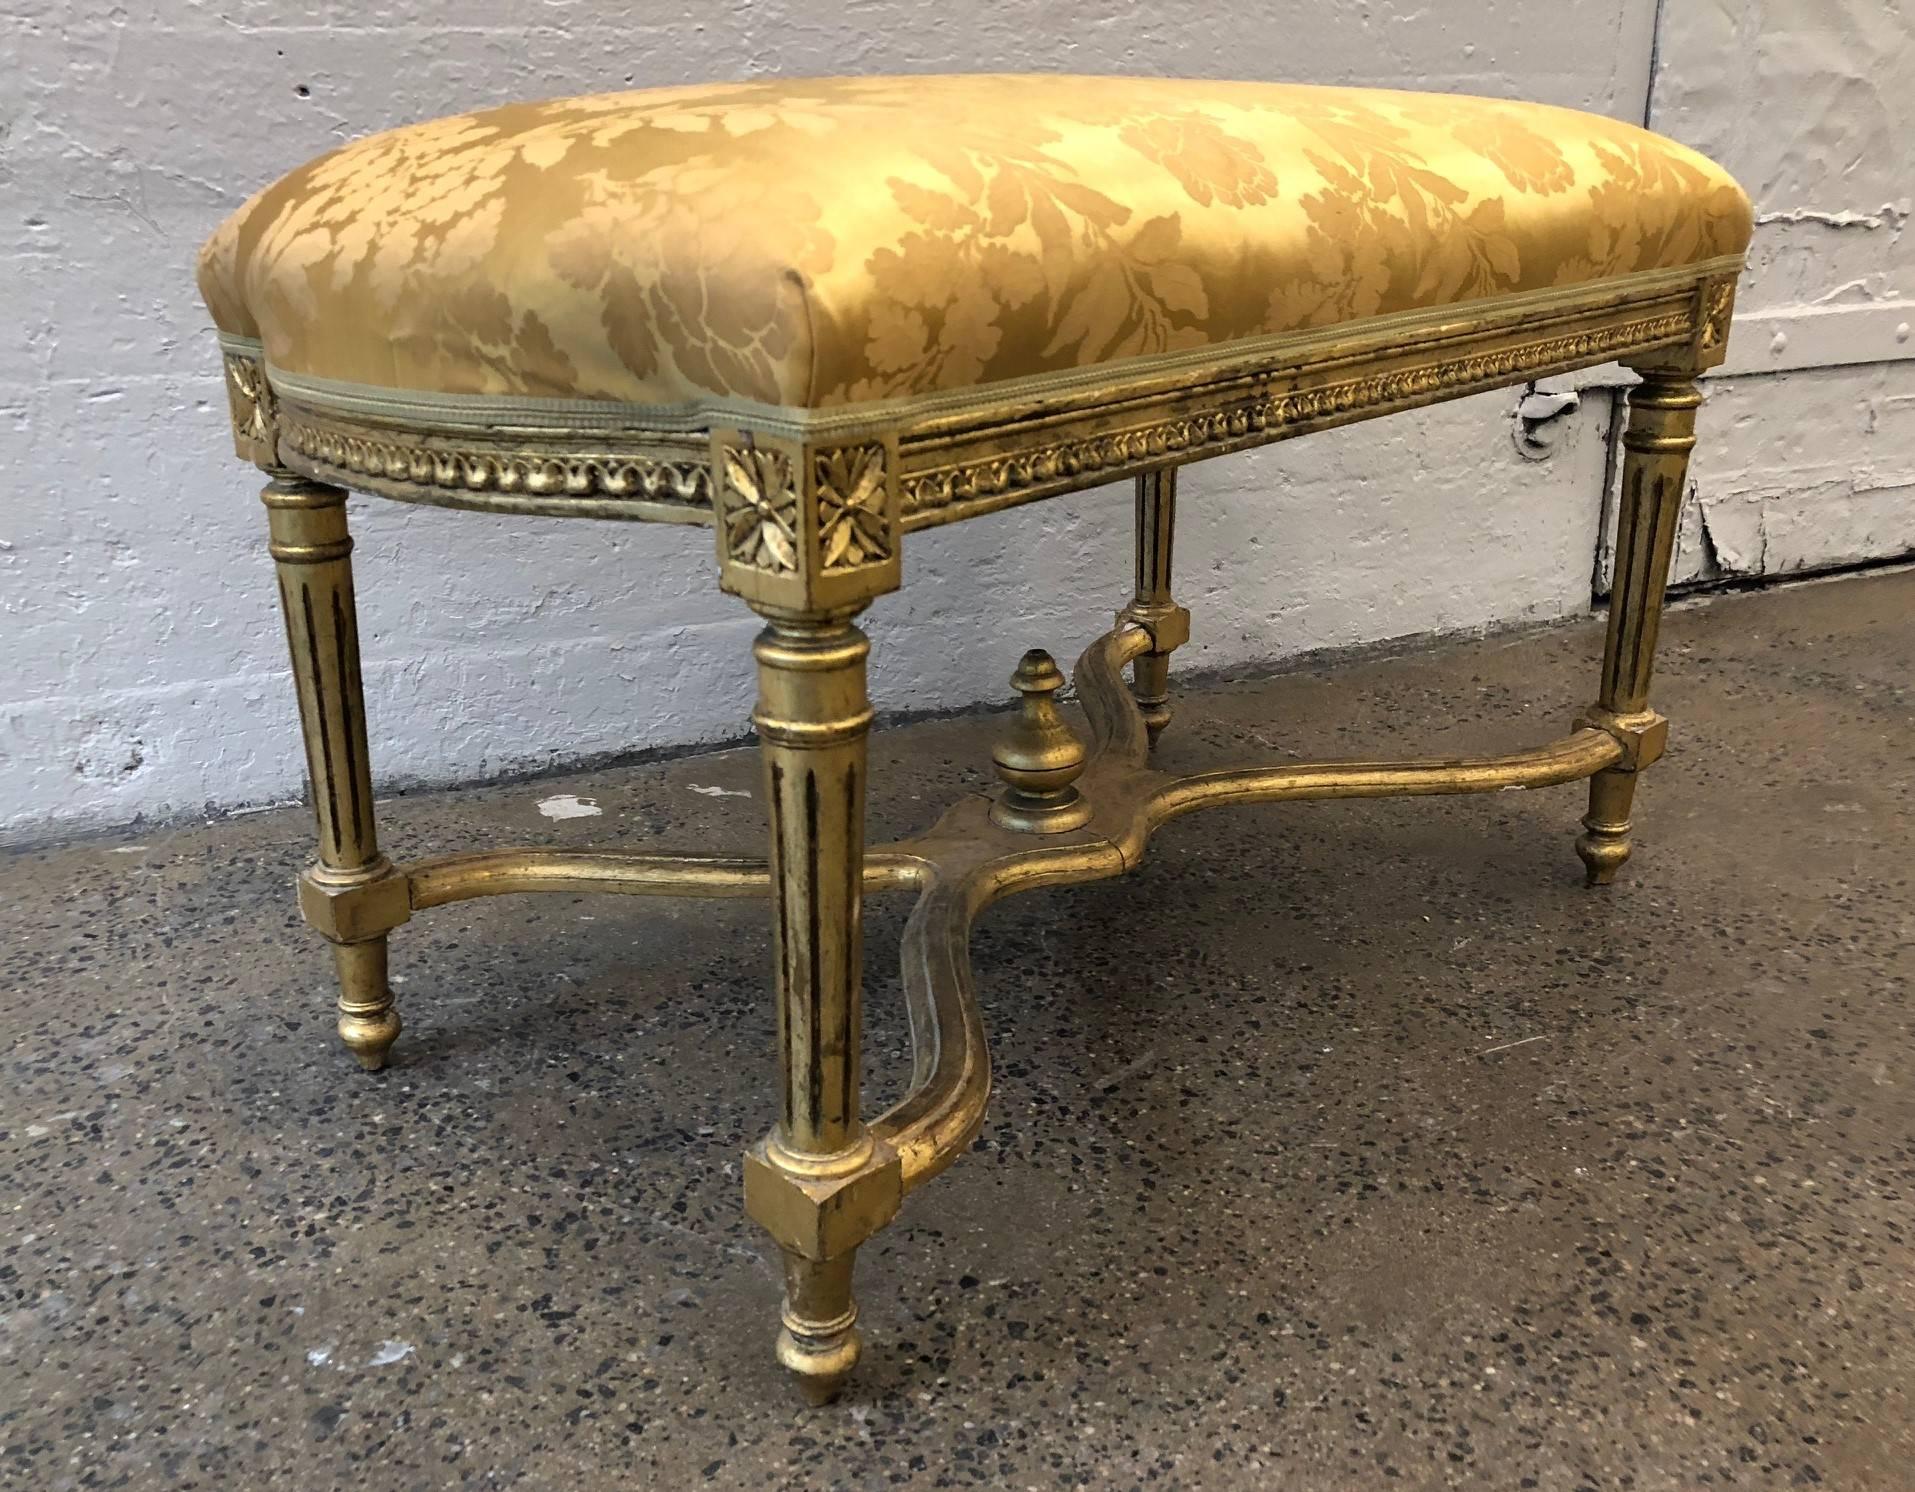 Louis XIV style giltwood bench. Upholstered in vintage gold silk fabric.